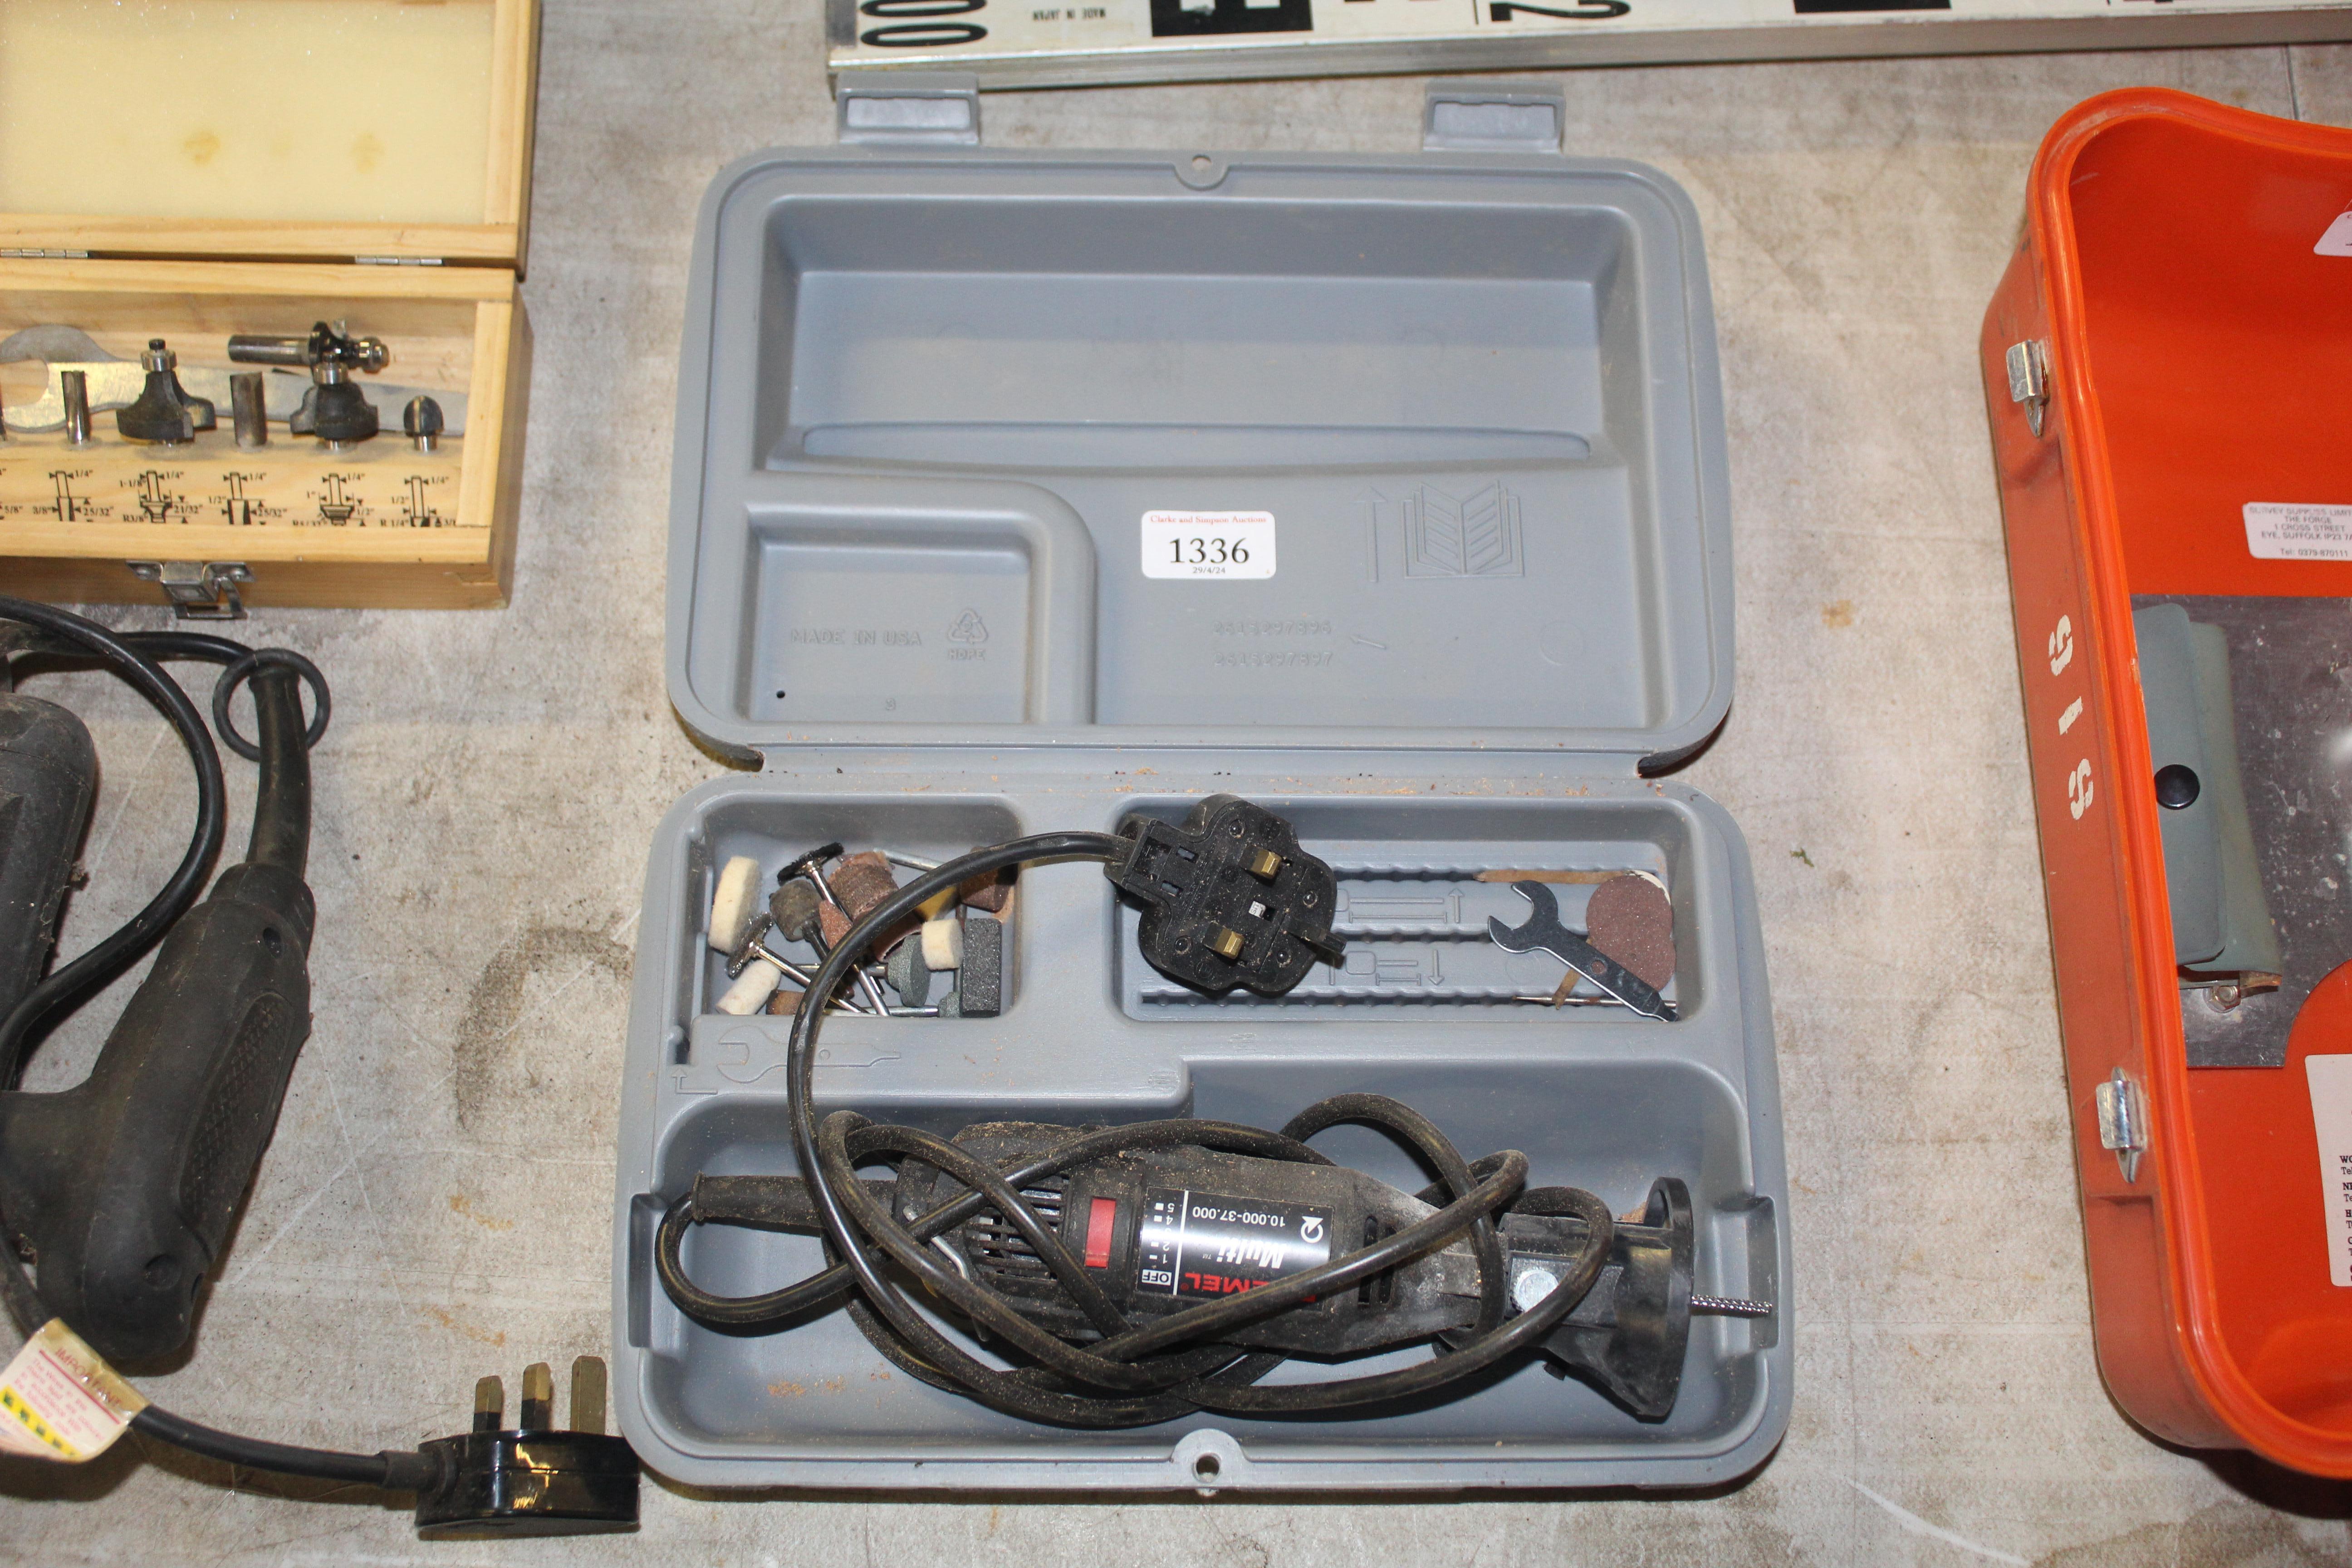 A Dremel multi tool in plastic case with various a